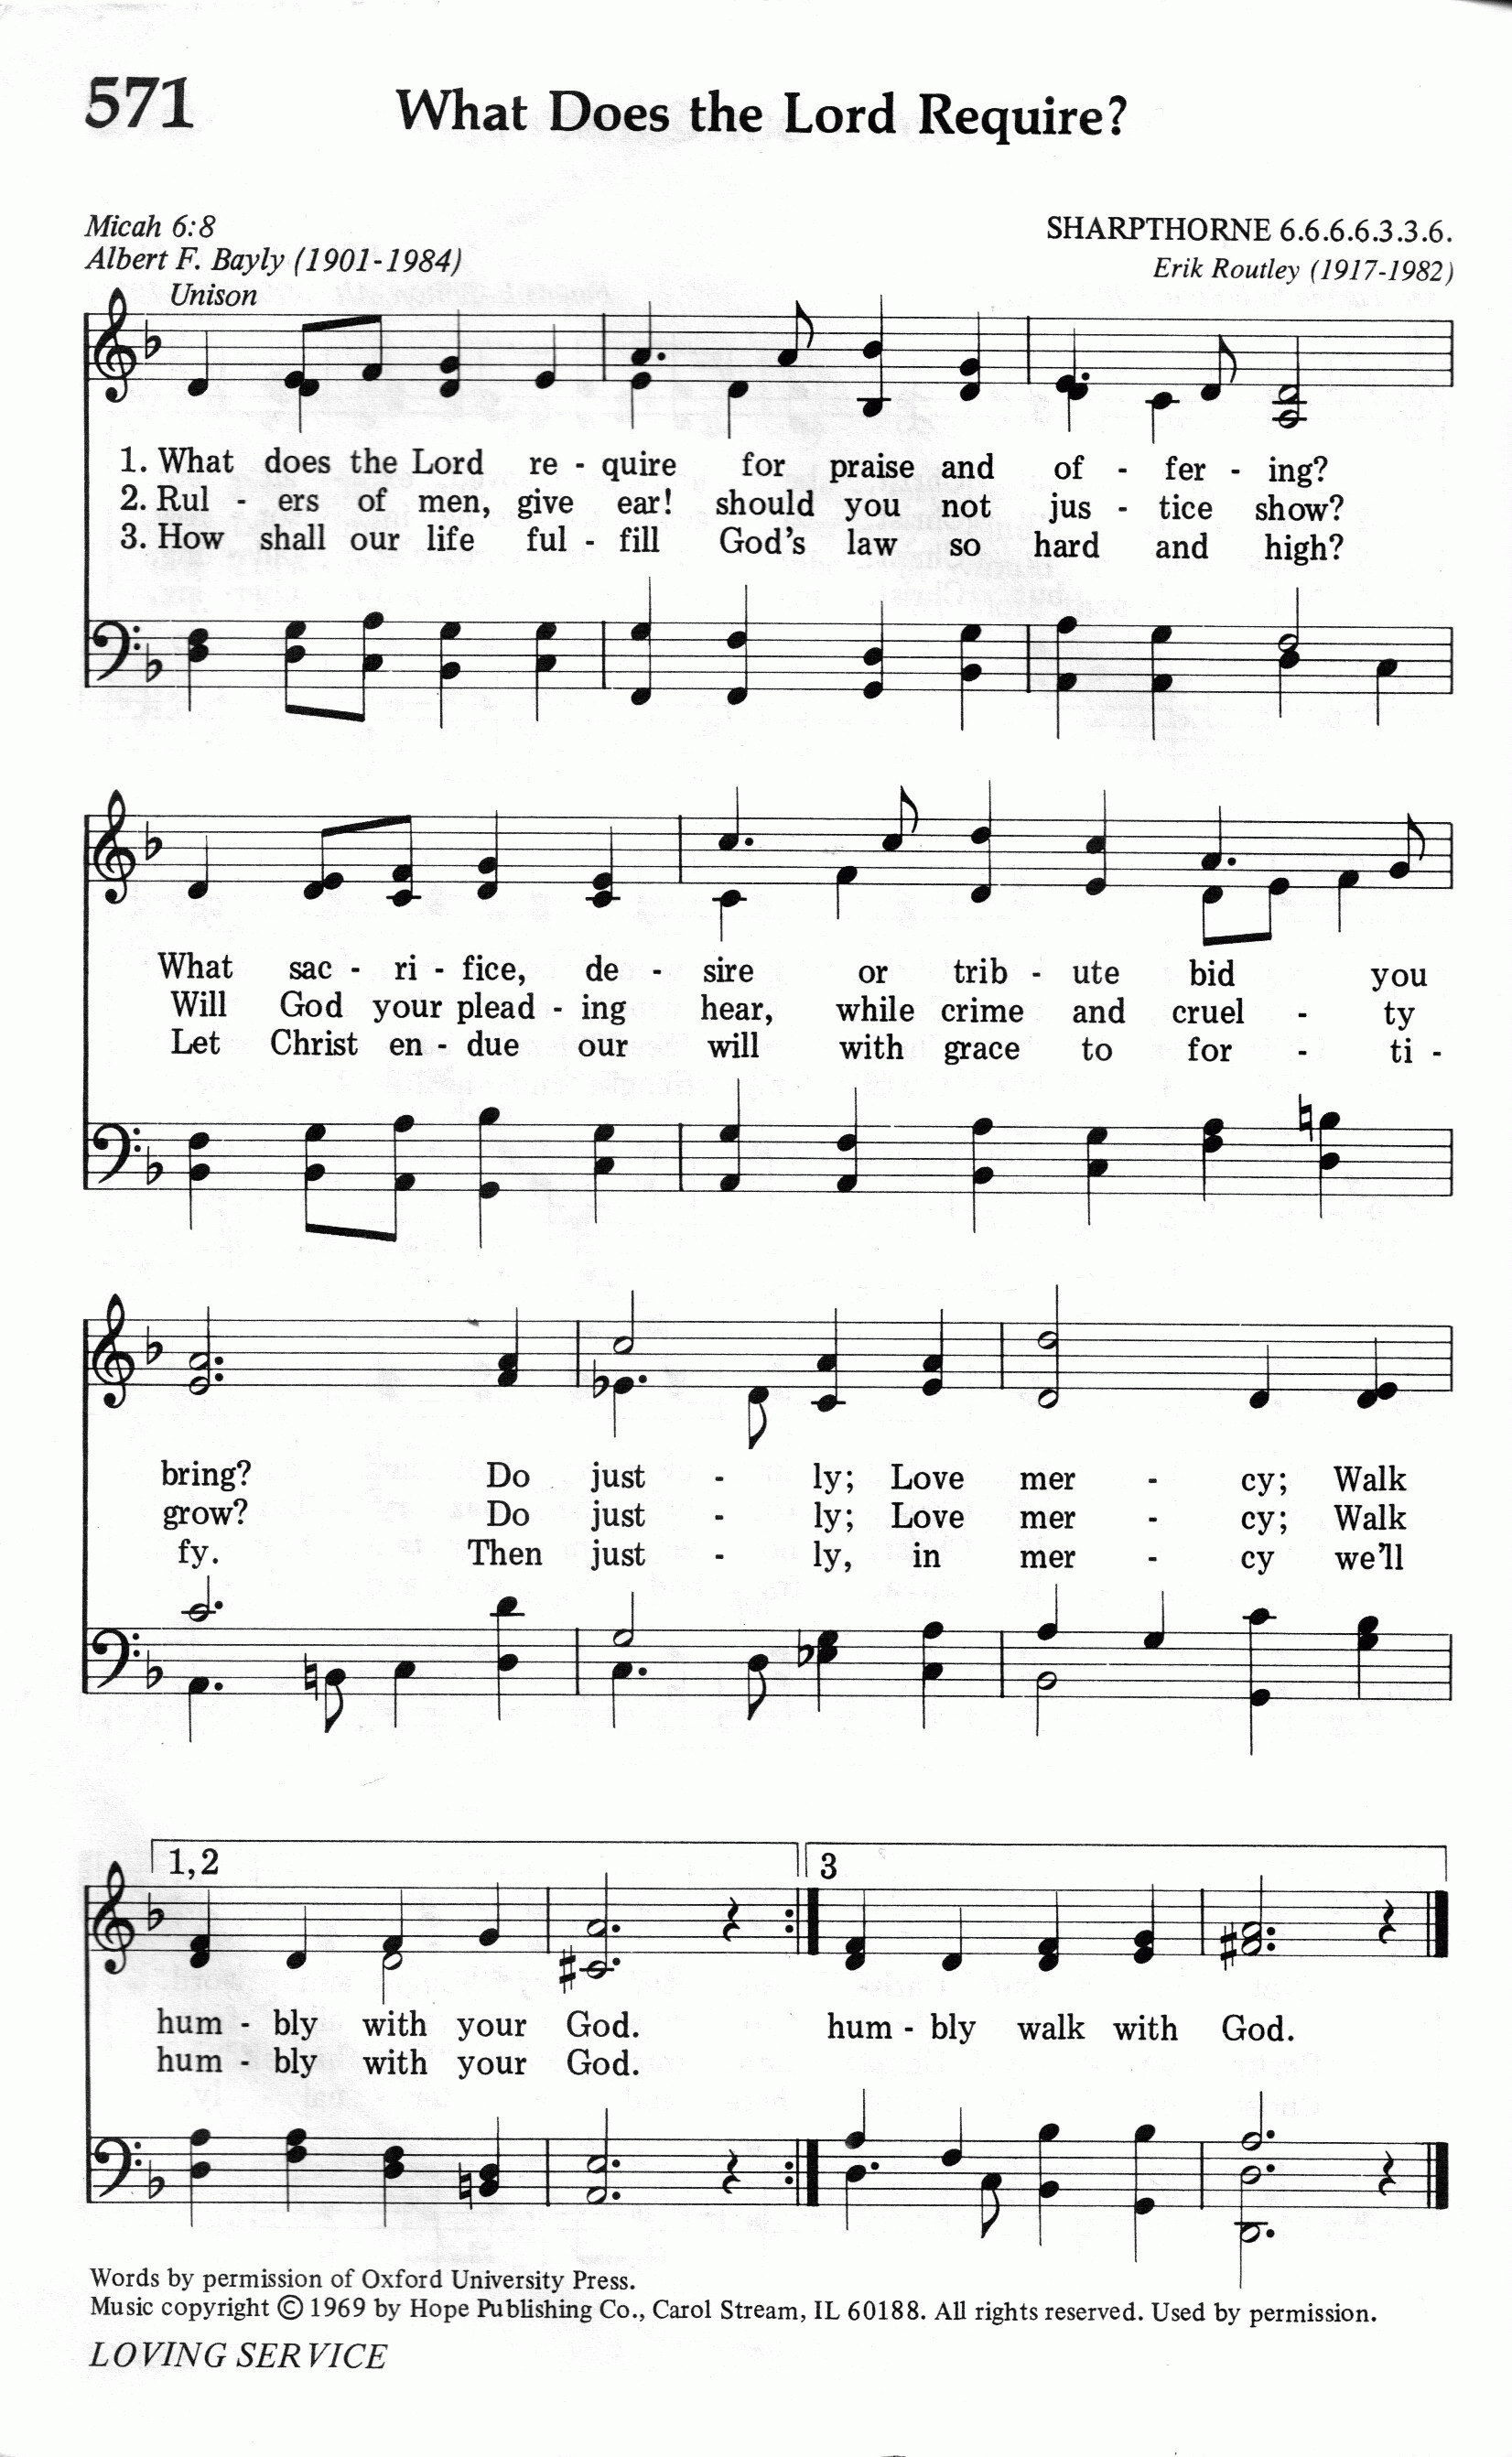 571.What Does the Lord Require-695HYMN